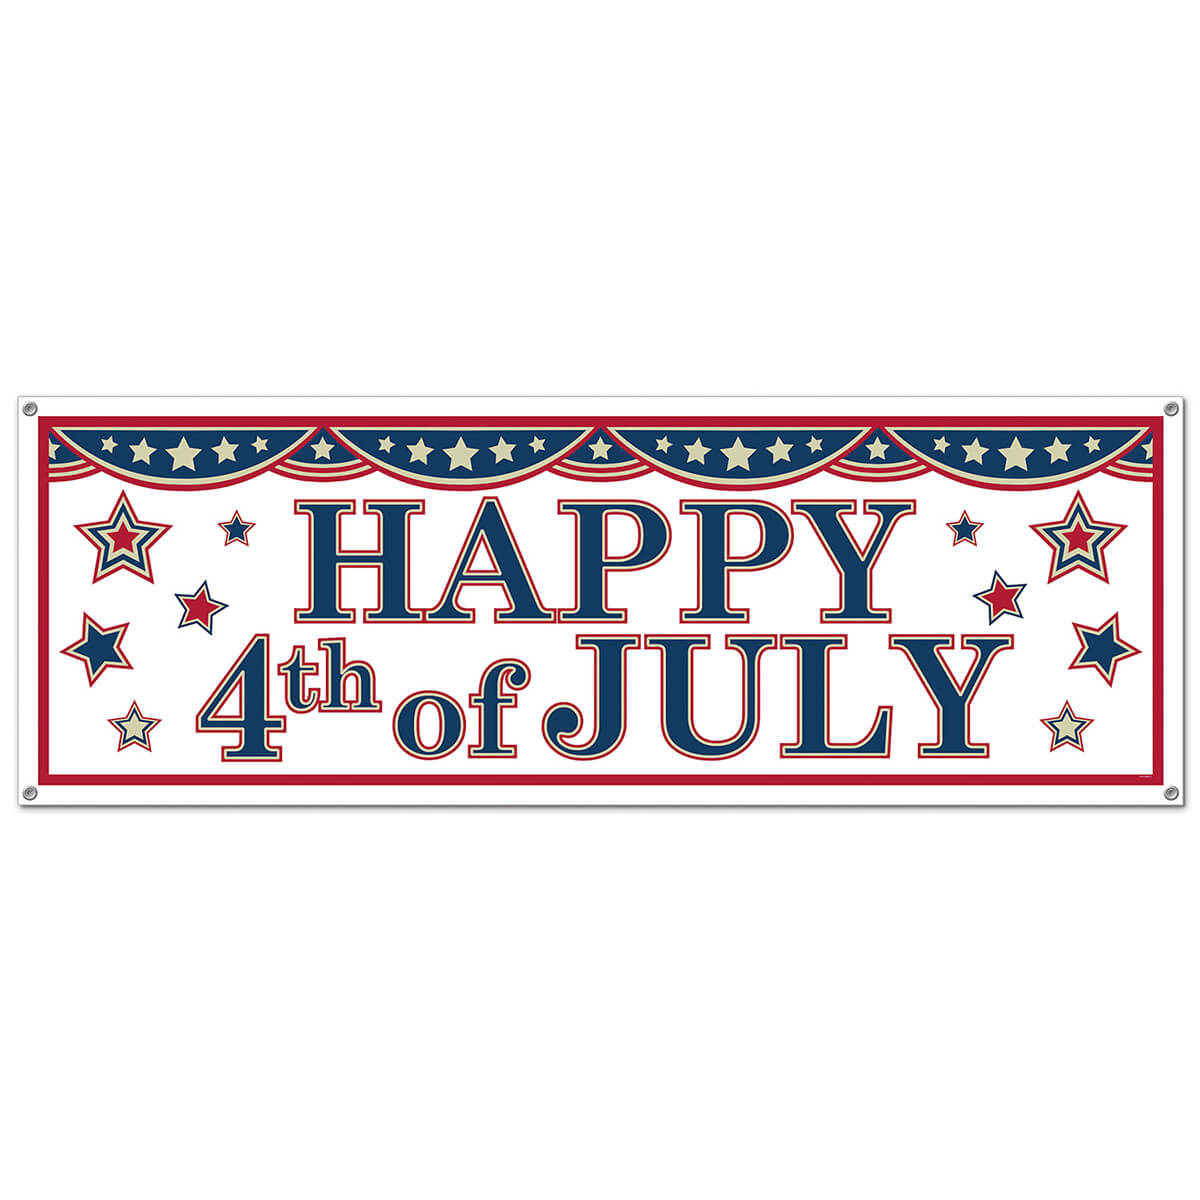 4th of July Sign Banner